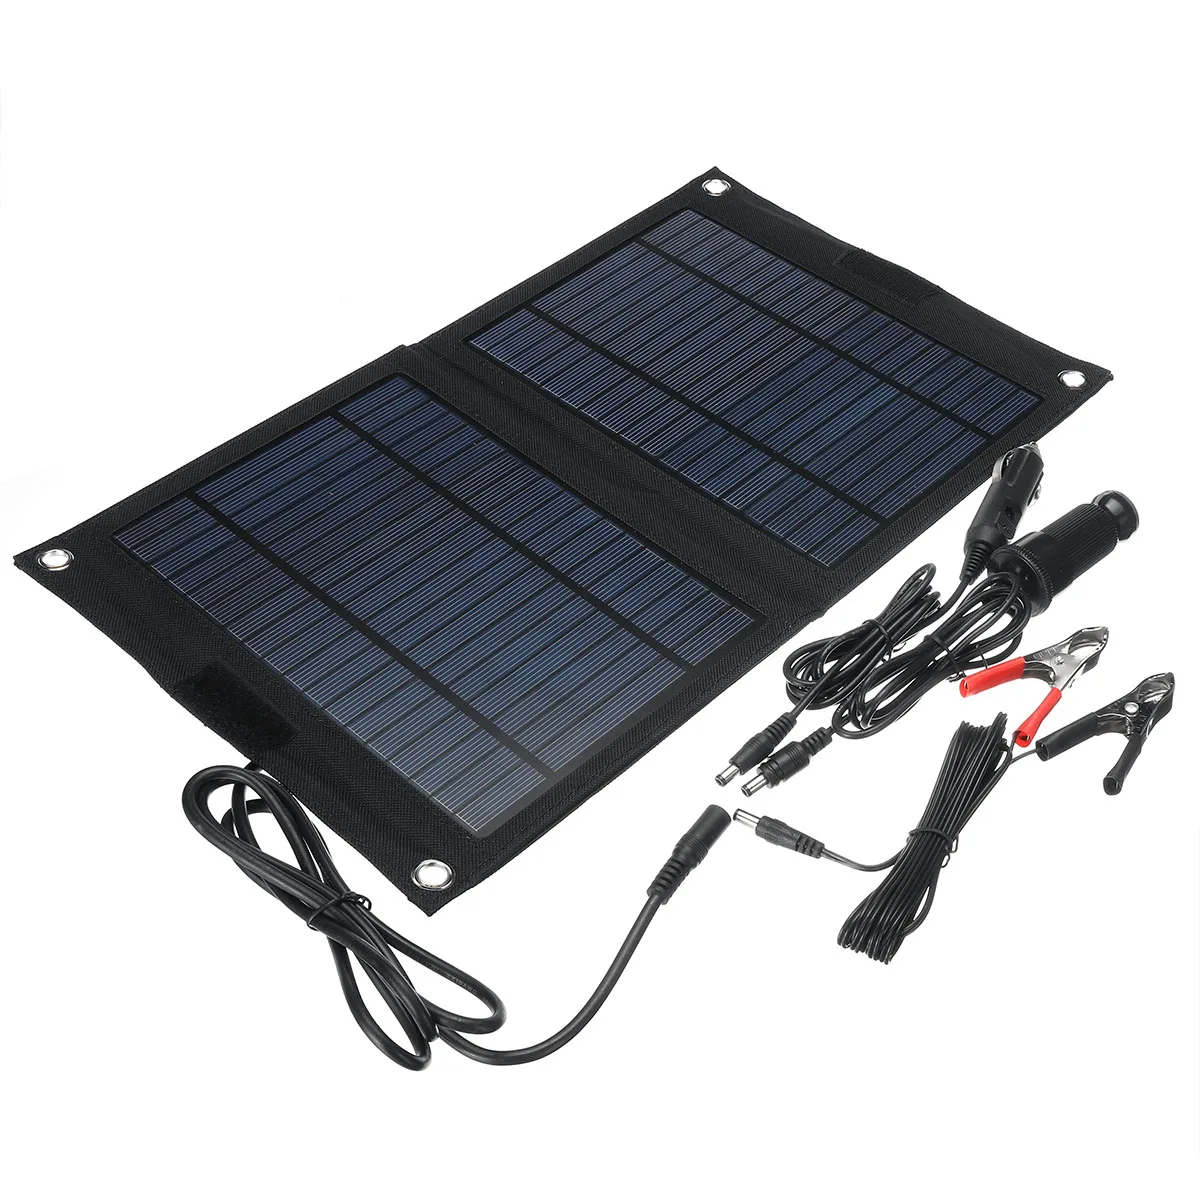 Camping Portable Foldable Solar Panel Folding Outdoor 50W Dual 12V/5V USB Charger Solar Battery For Mobile Phone Car Charging